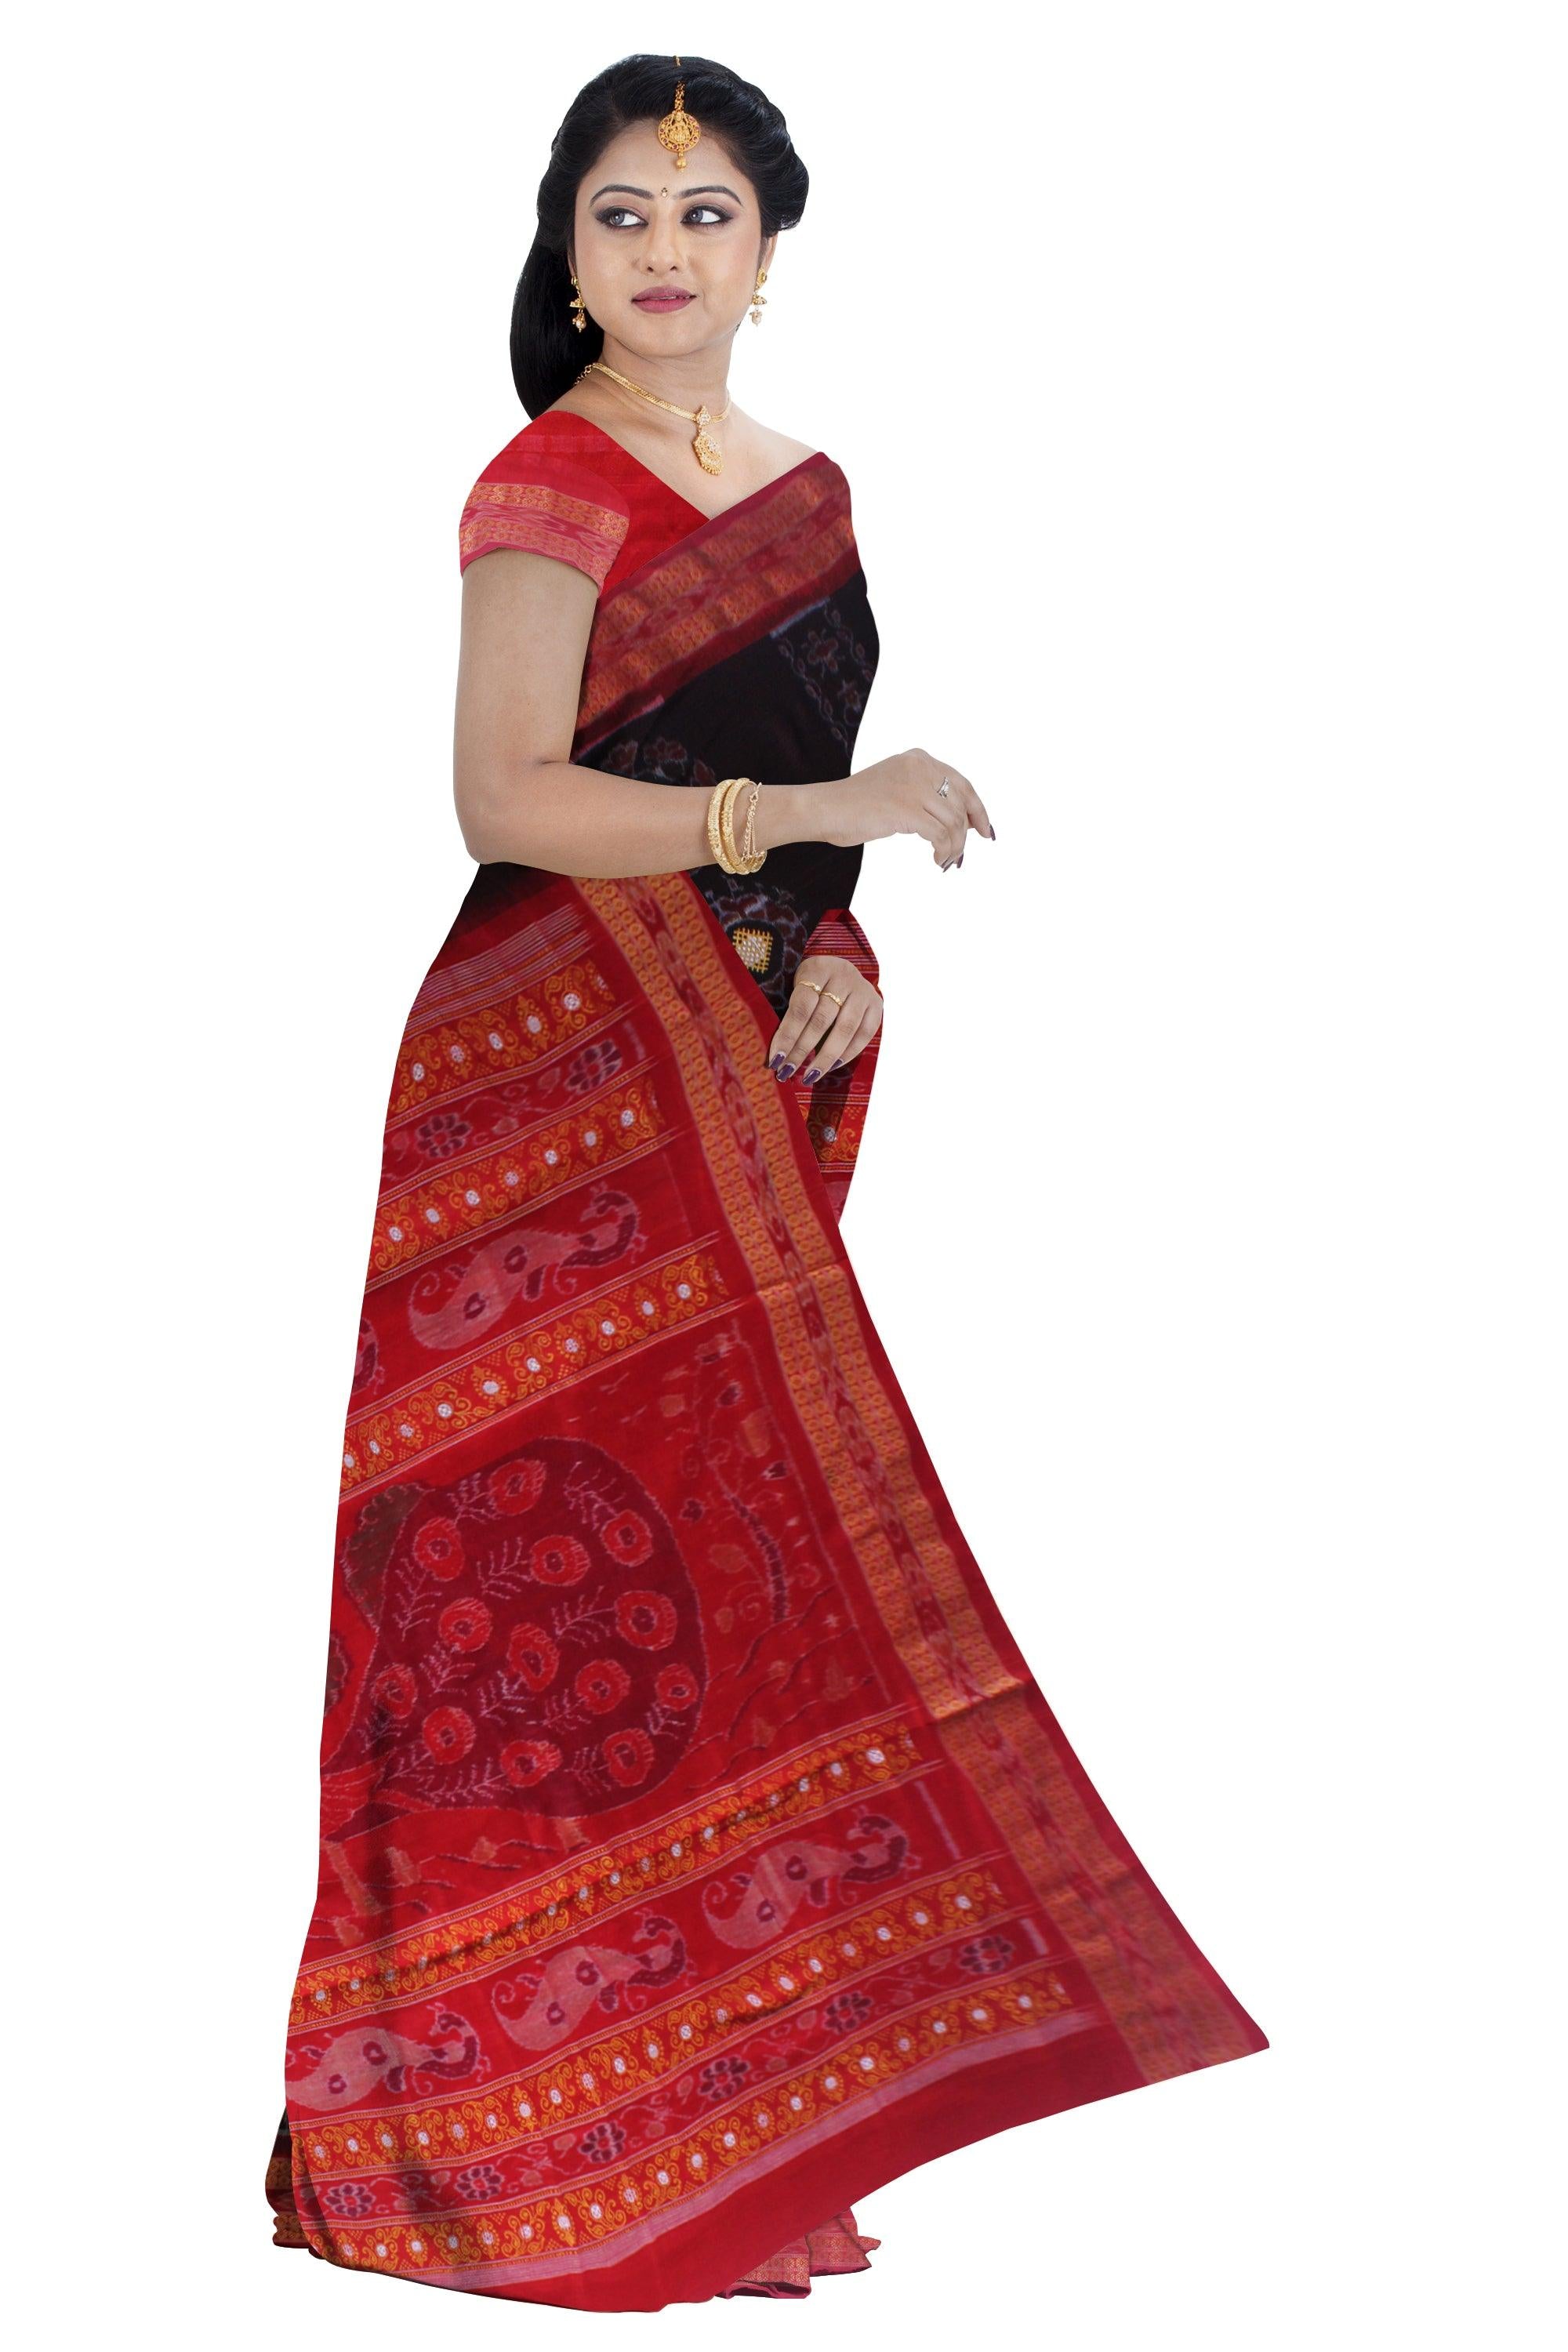 NEW DESIGN PEACOCK AND FLOWER BASED COTTON SAREE IN BLACK AND RED COLOR, AVAILABLE WITH BLOUSE. - Koshali Arts & Crafts Enterprise